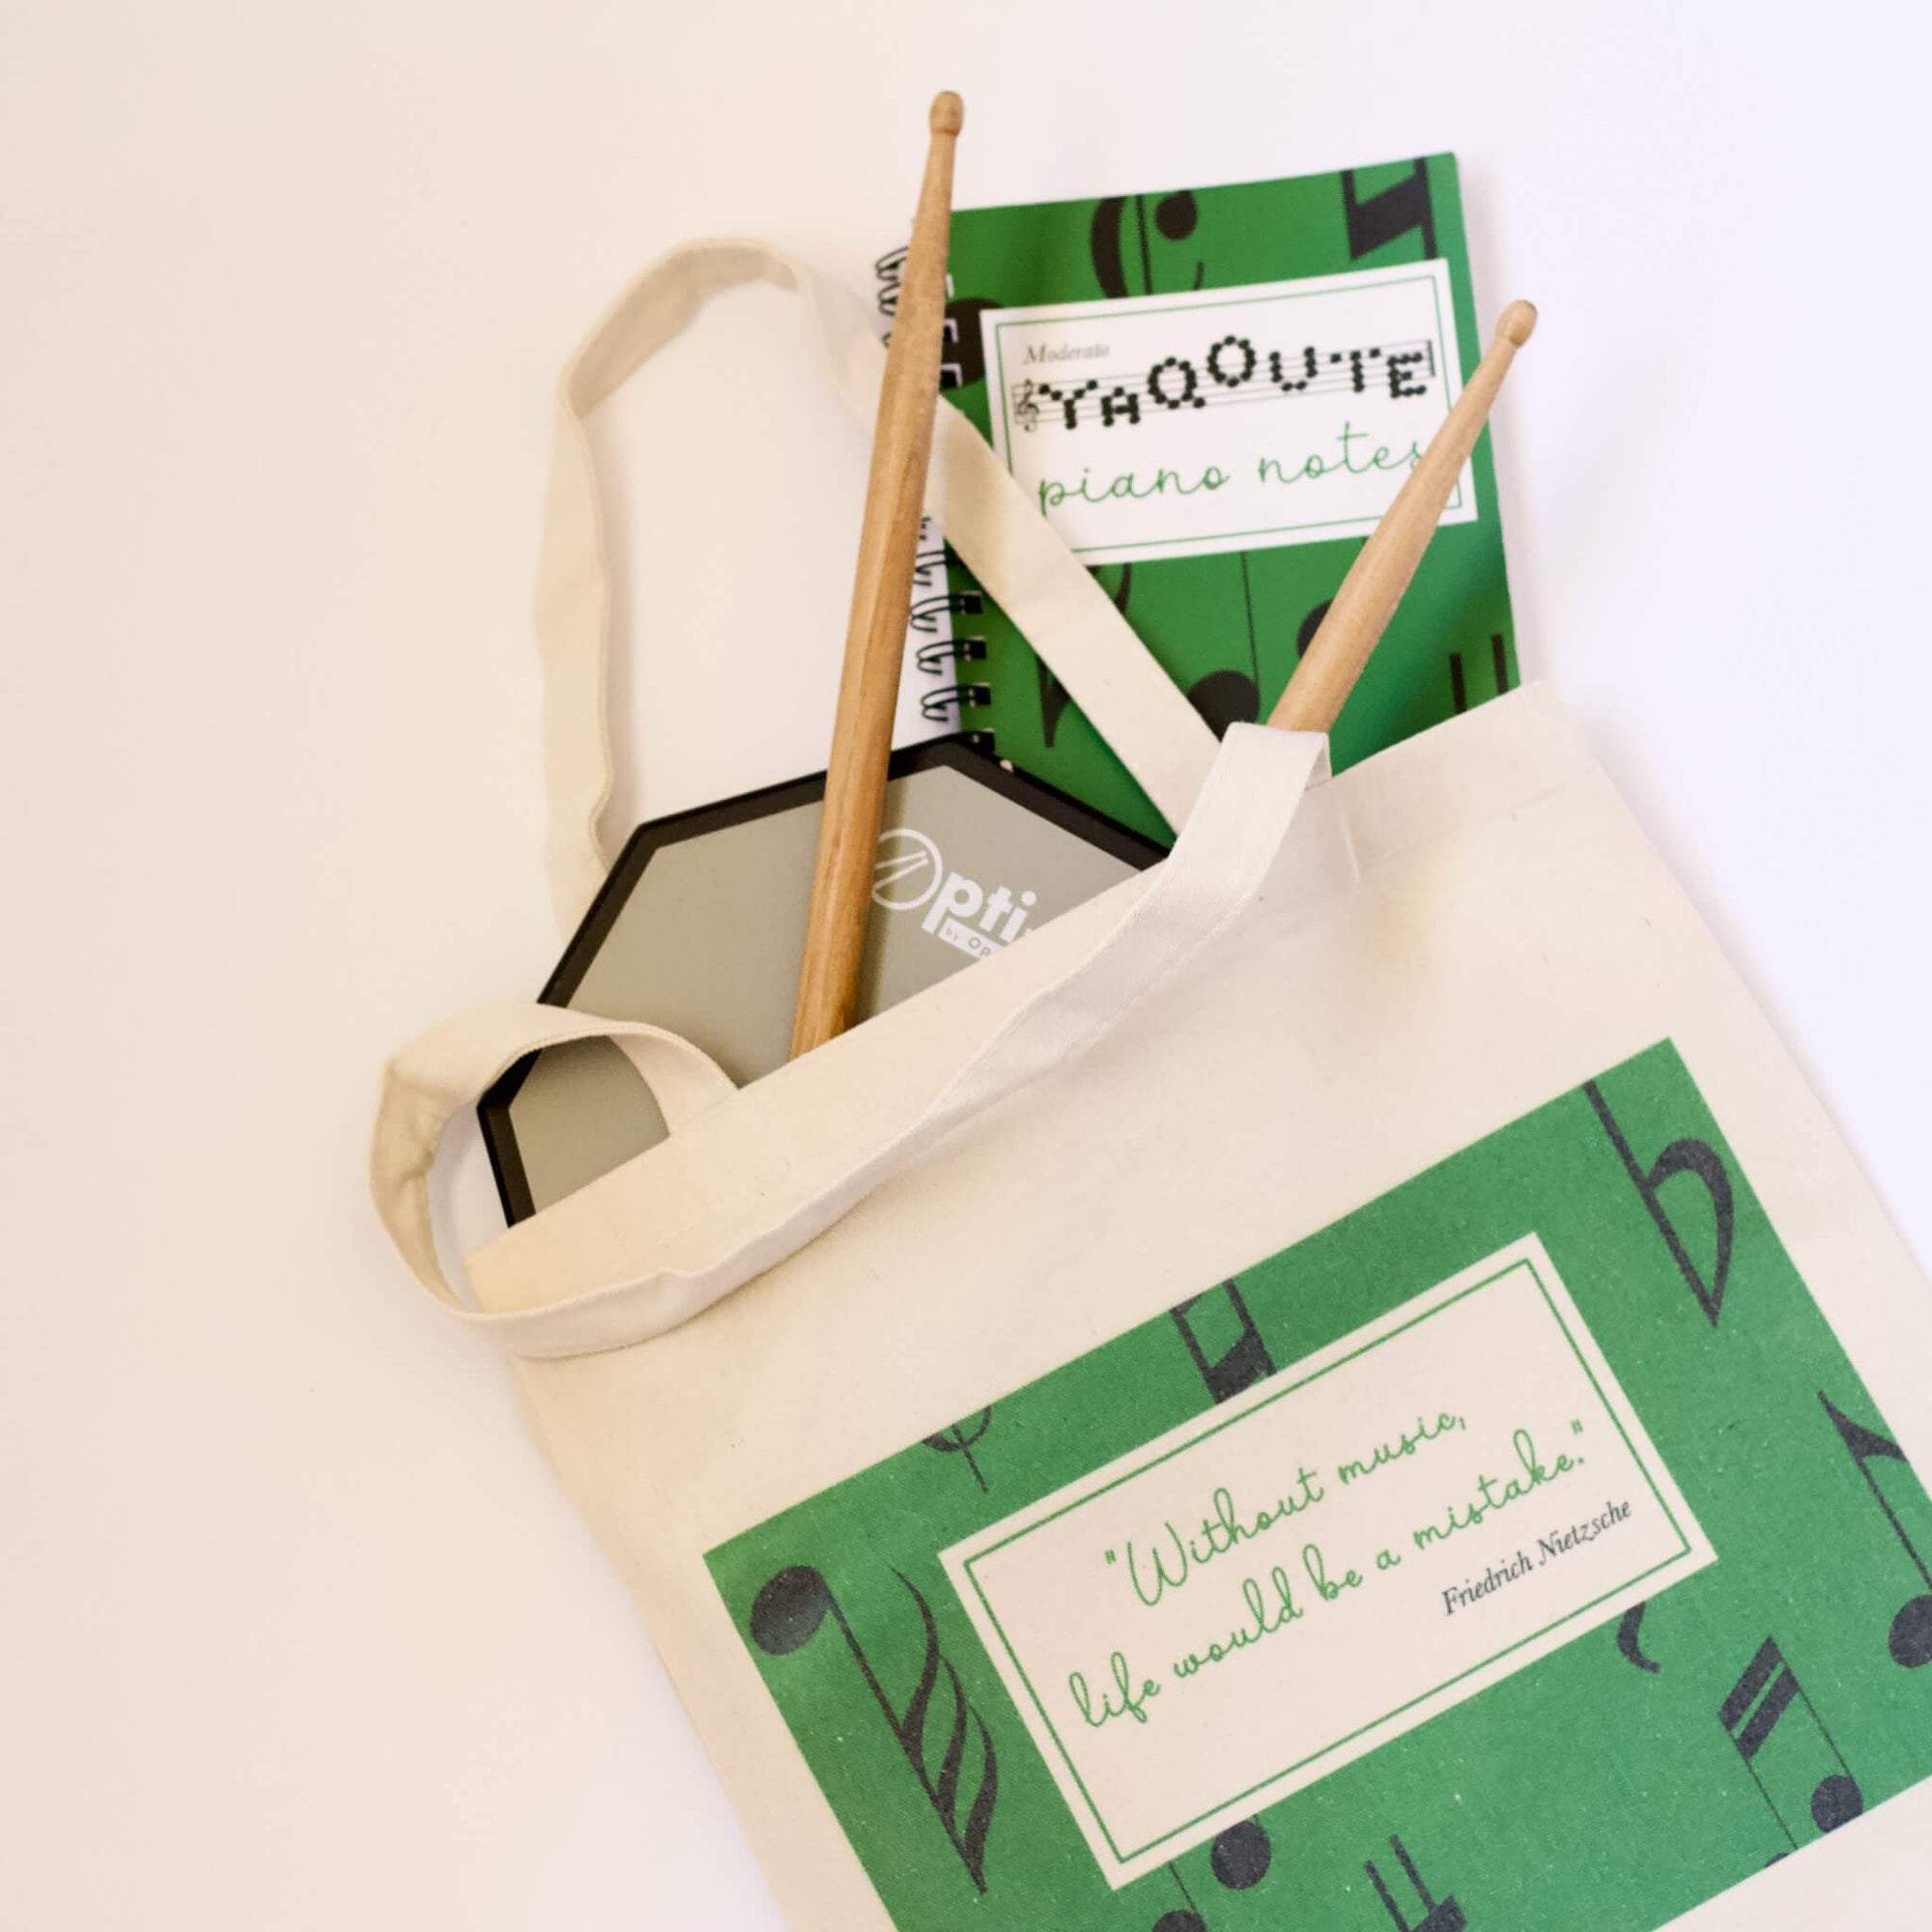 The Haluna Happy Names Musically range of bags, notebooks, ID tags, mugs and more is perfect for budding and experienced musicians alike. Forest green bag with Nietzsche quote, matching notebook shown here in flatlay with drumsticks and drum practice pad.